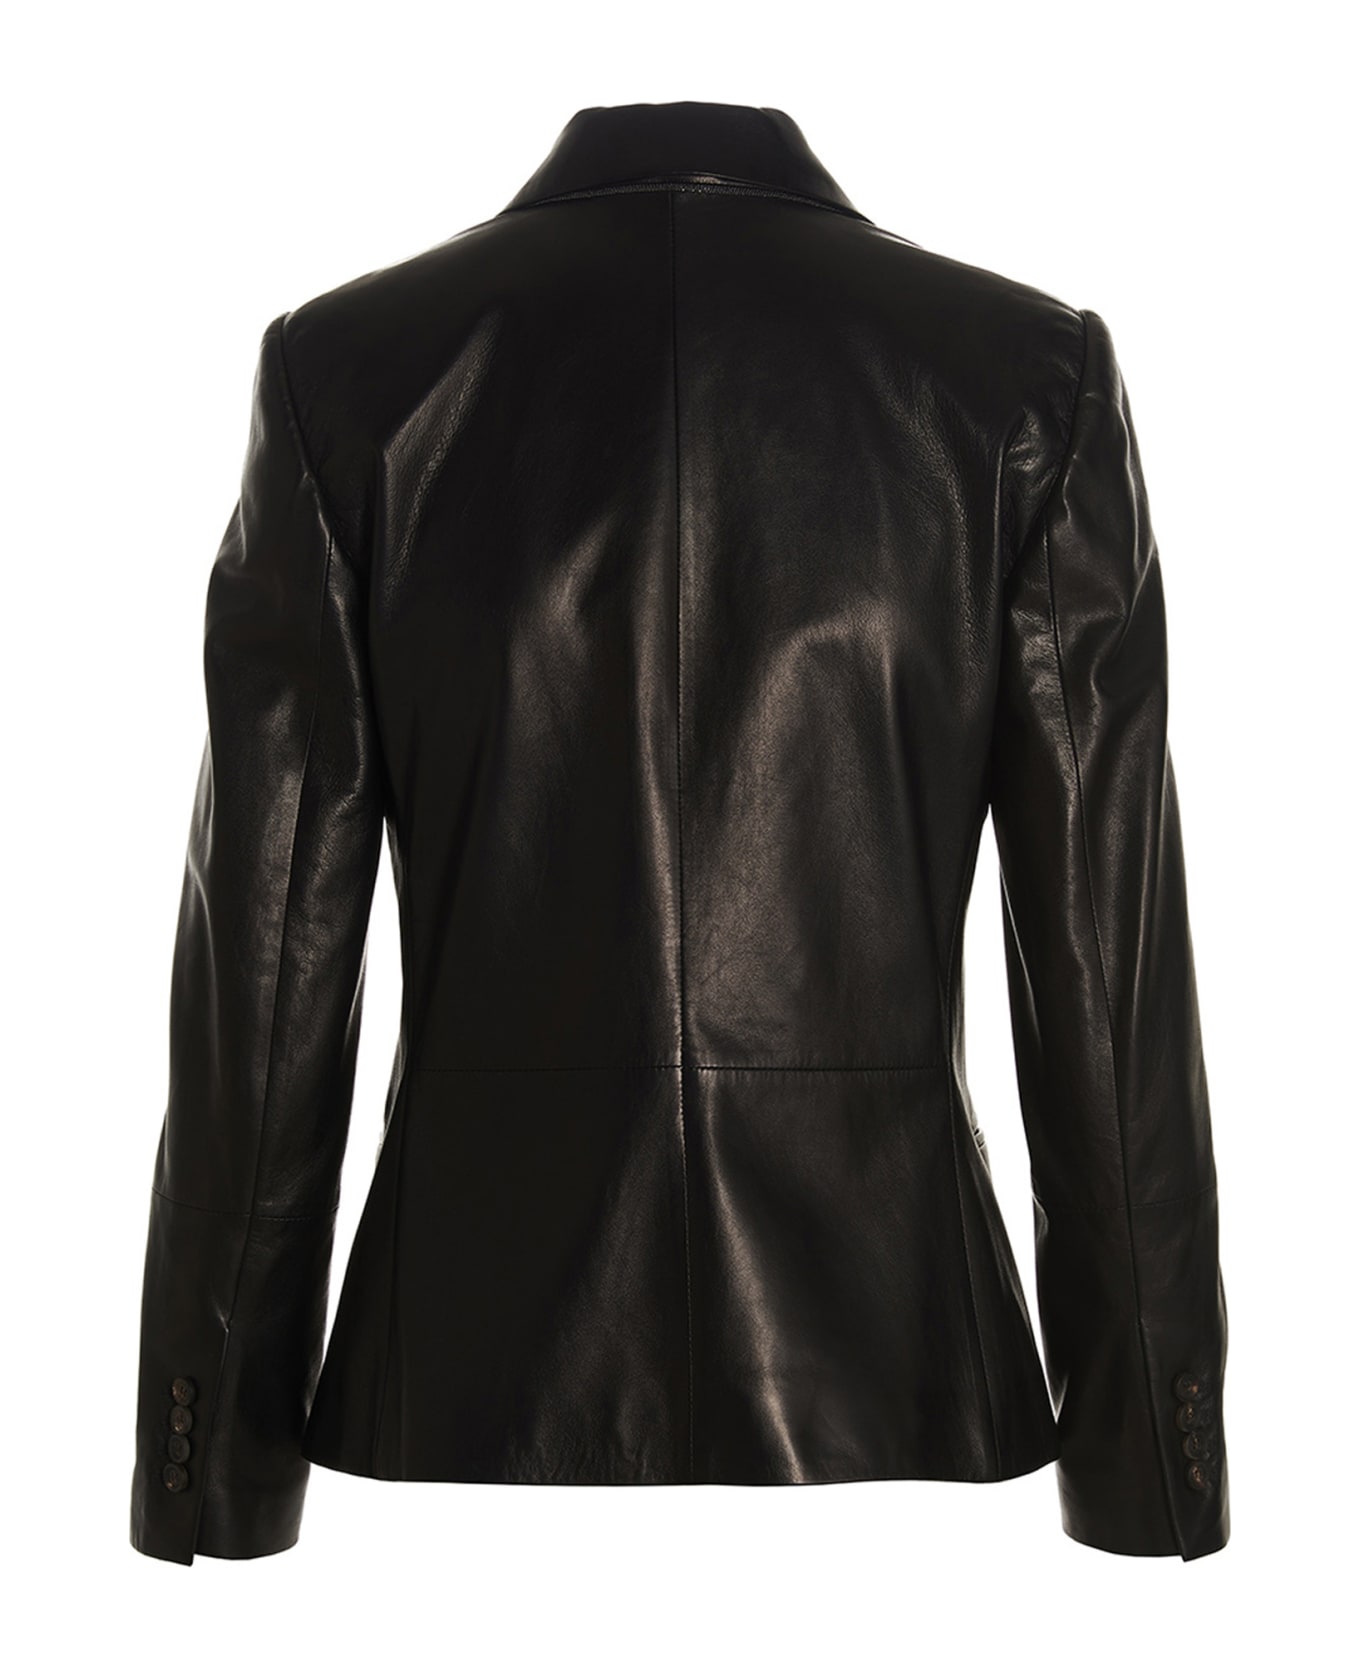 Brunello Cucinelli Double-breasted Leather Jacket - Black ブレザー